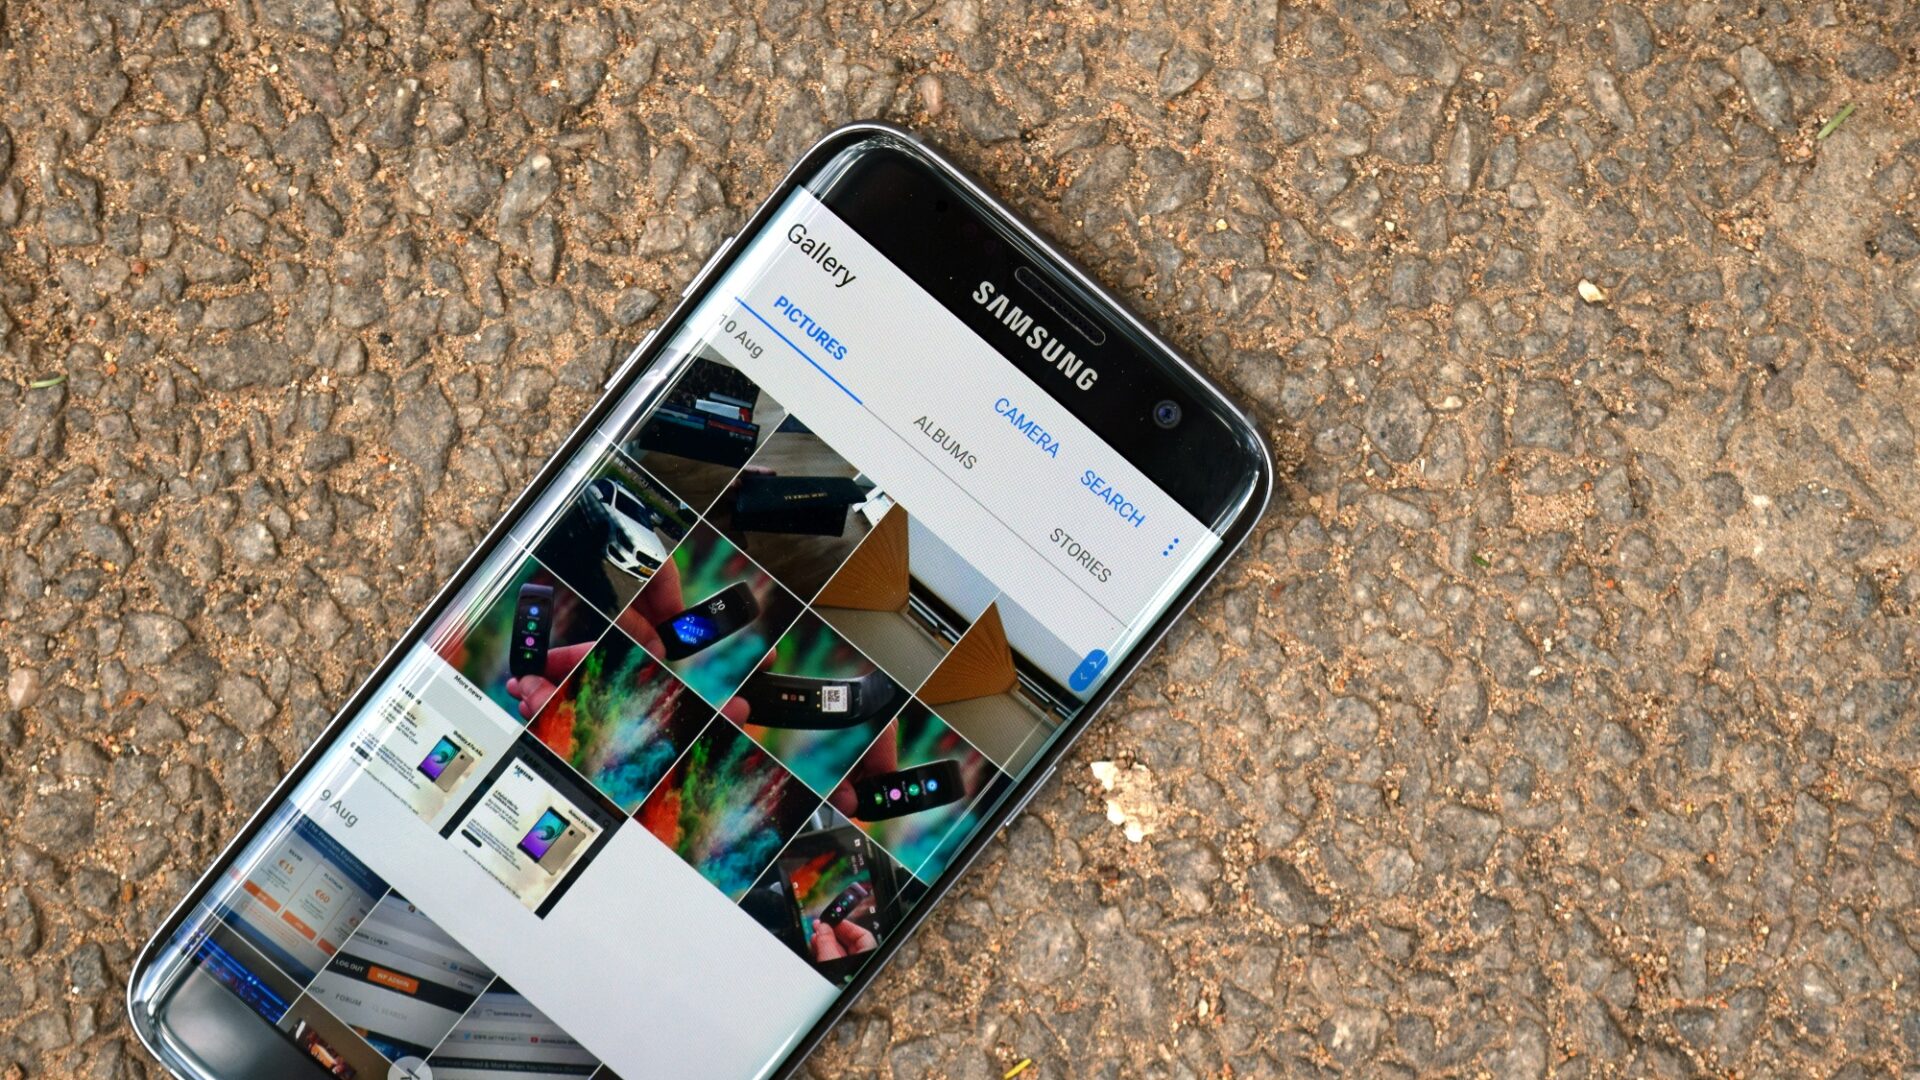 Recent Galaxy S7 And S7 Edge Update Includes New Gallery App With Face And Object Recognition 8617